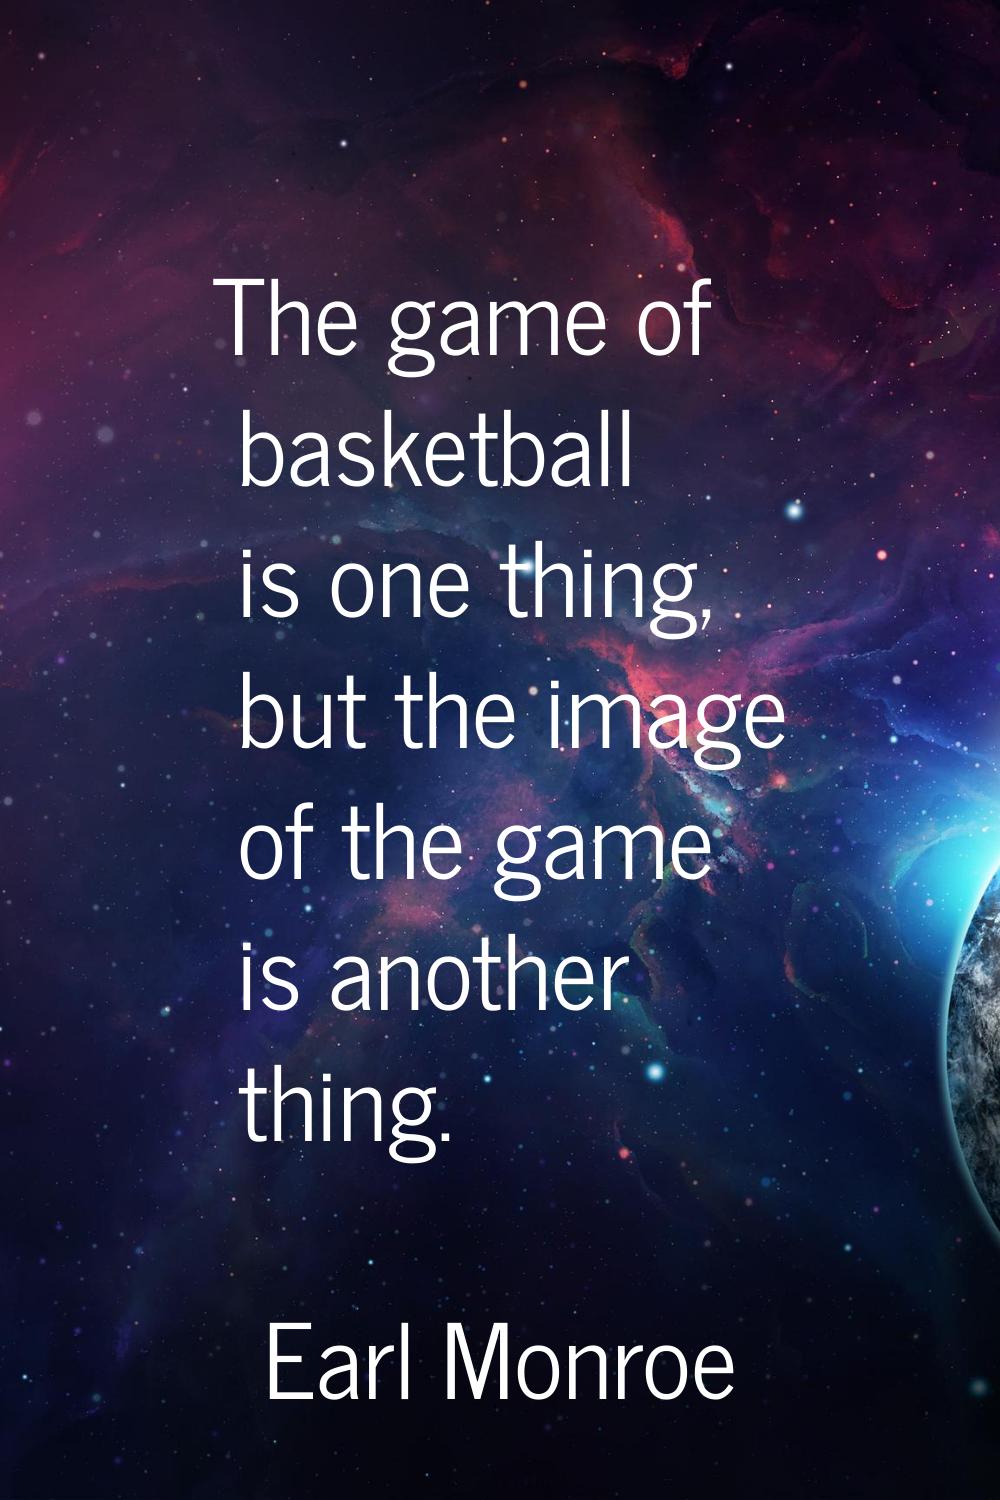 The game of basketball is one thing, but the image of the game is another thing.